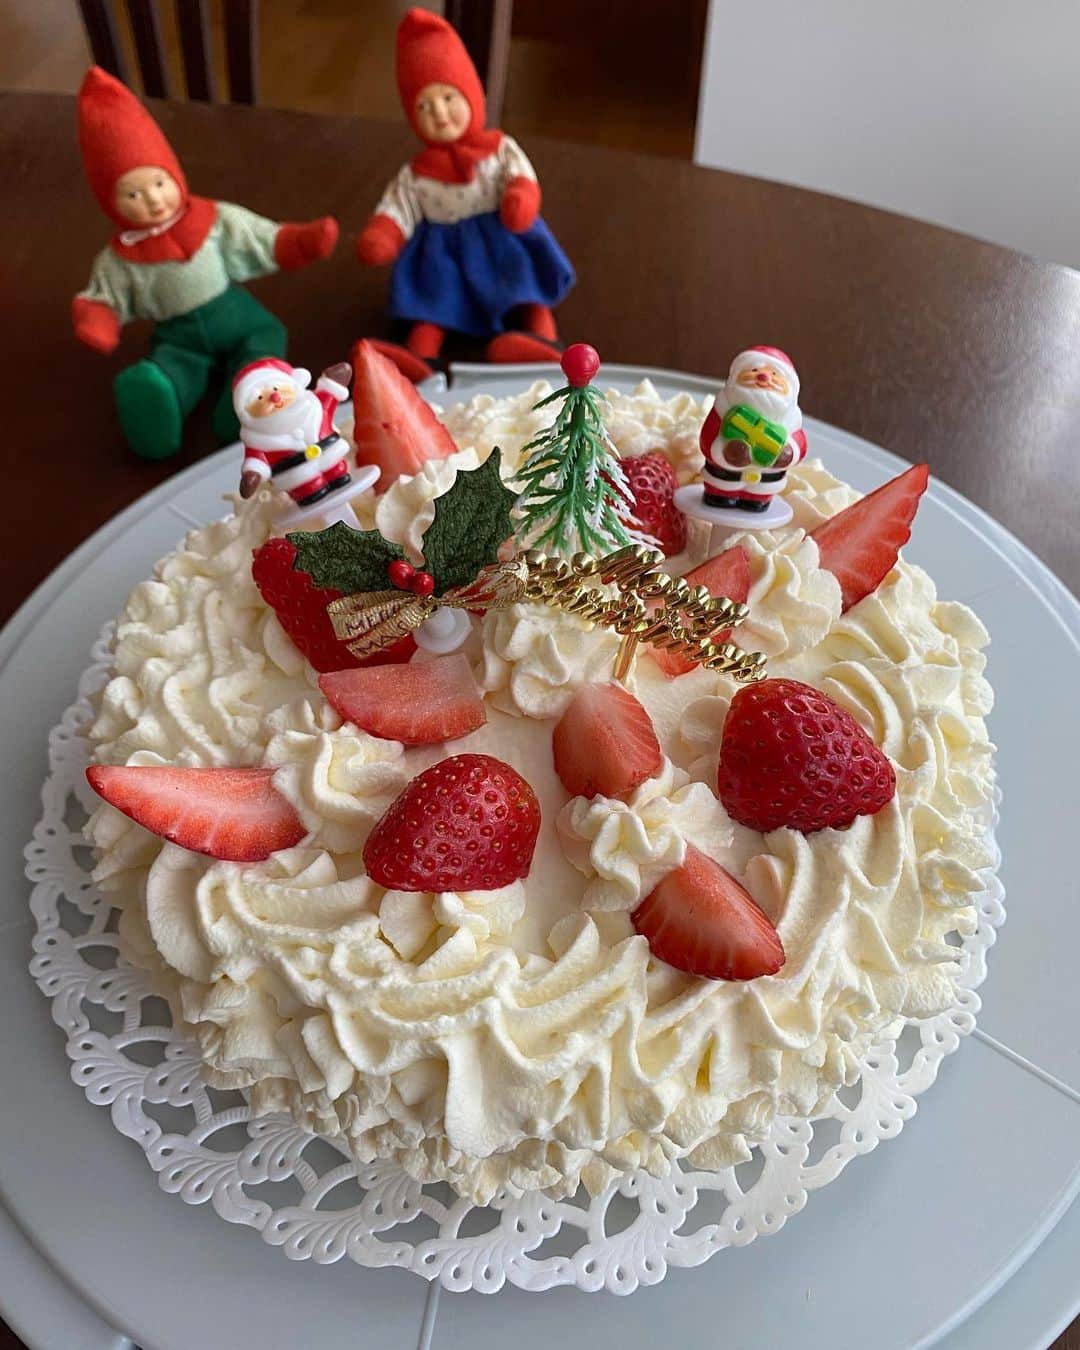 Rie's Healthy Bento from Osloのインスタグラム：「Christmas cake 2021, Japanese strawberry shortcake #christmas #christmascake #ケーキ#homebaked #cakes #cakelover #merrychristmas」